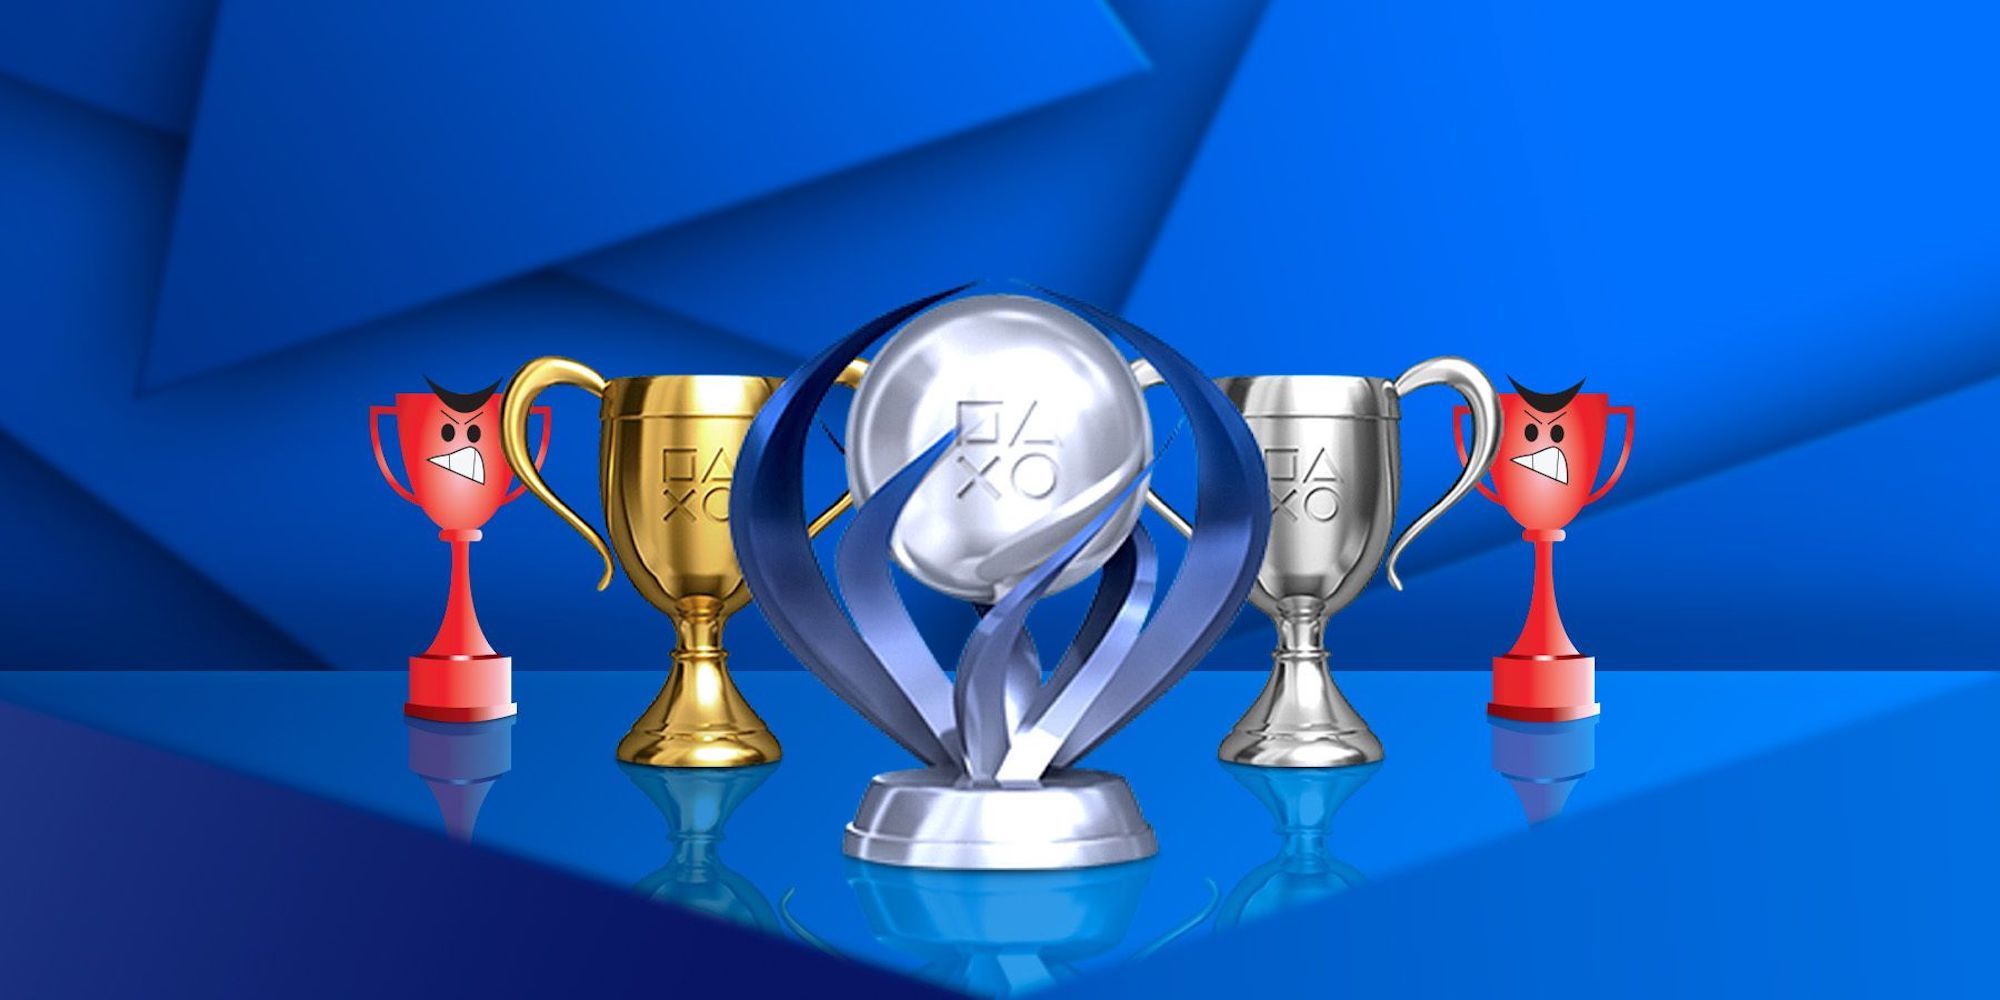 A set of PlayStation trophies with two trophies at each end with angry faces